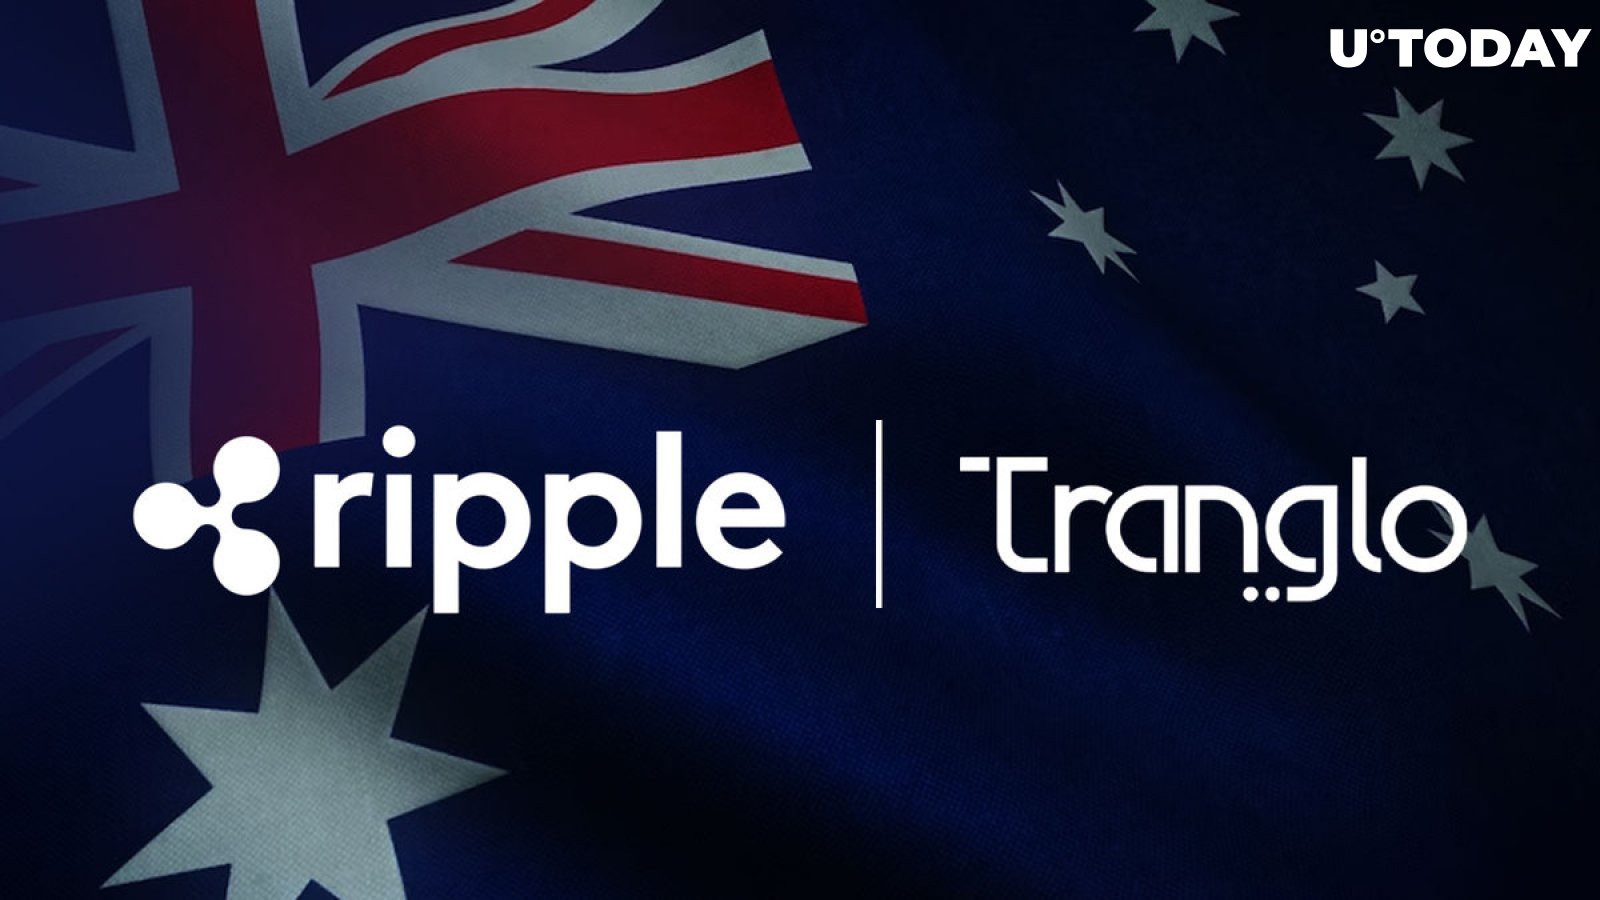 Ripple Remittances Expand Further into Asia Pacific via Tranglo's New Partnership